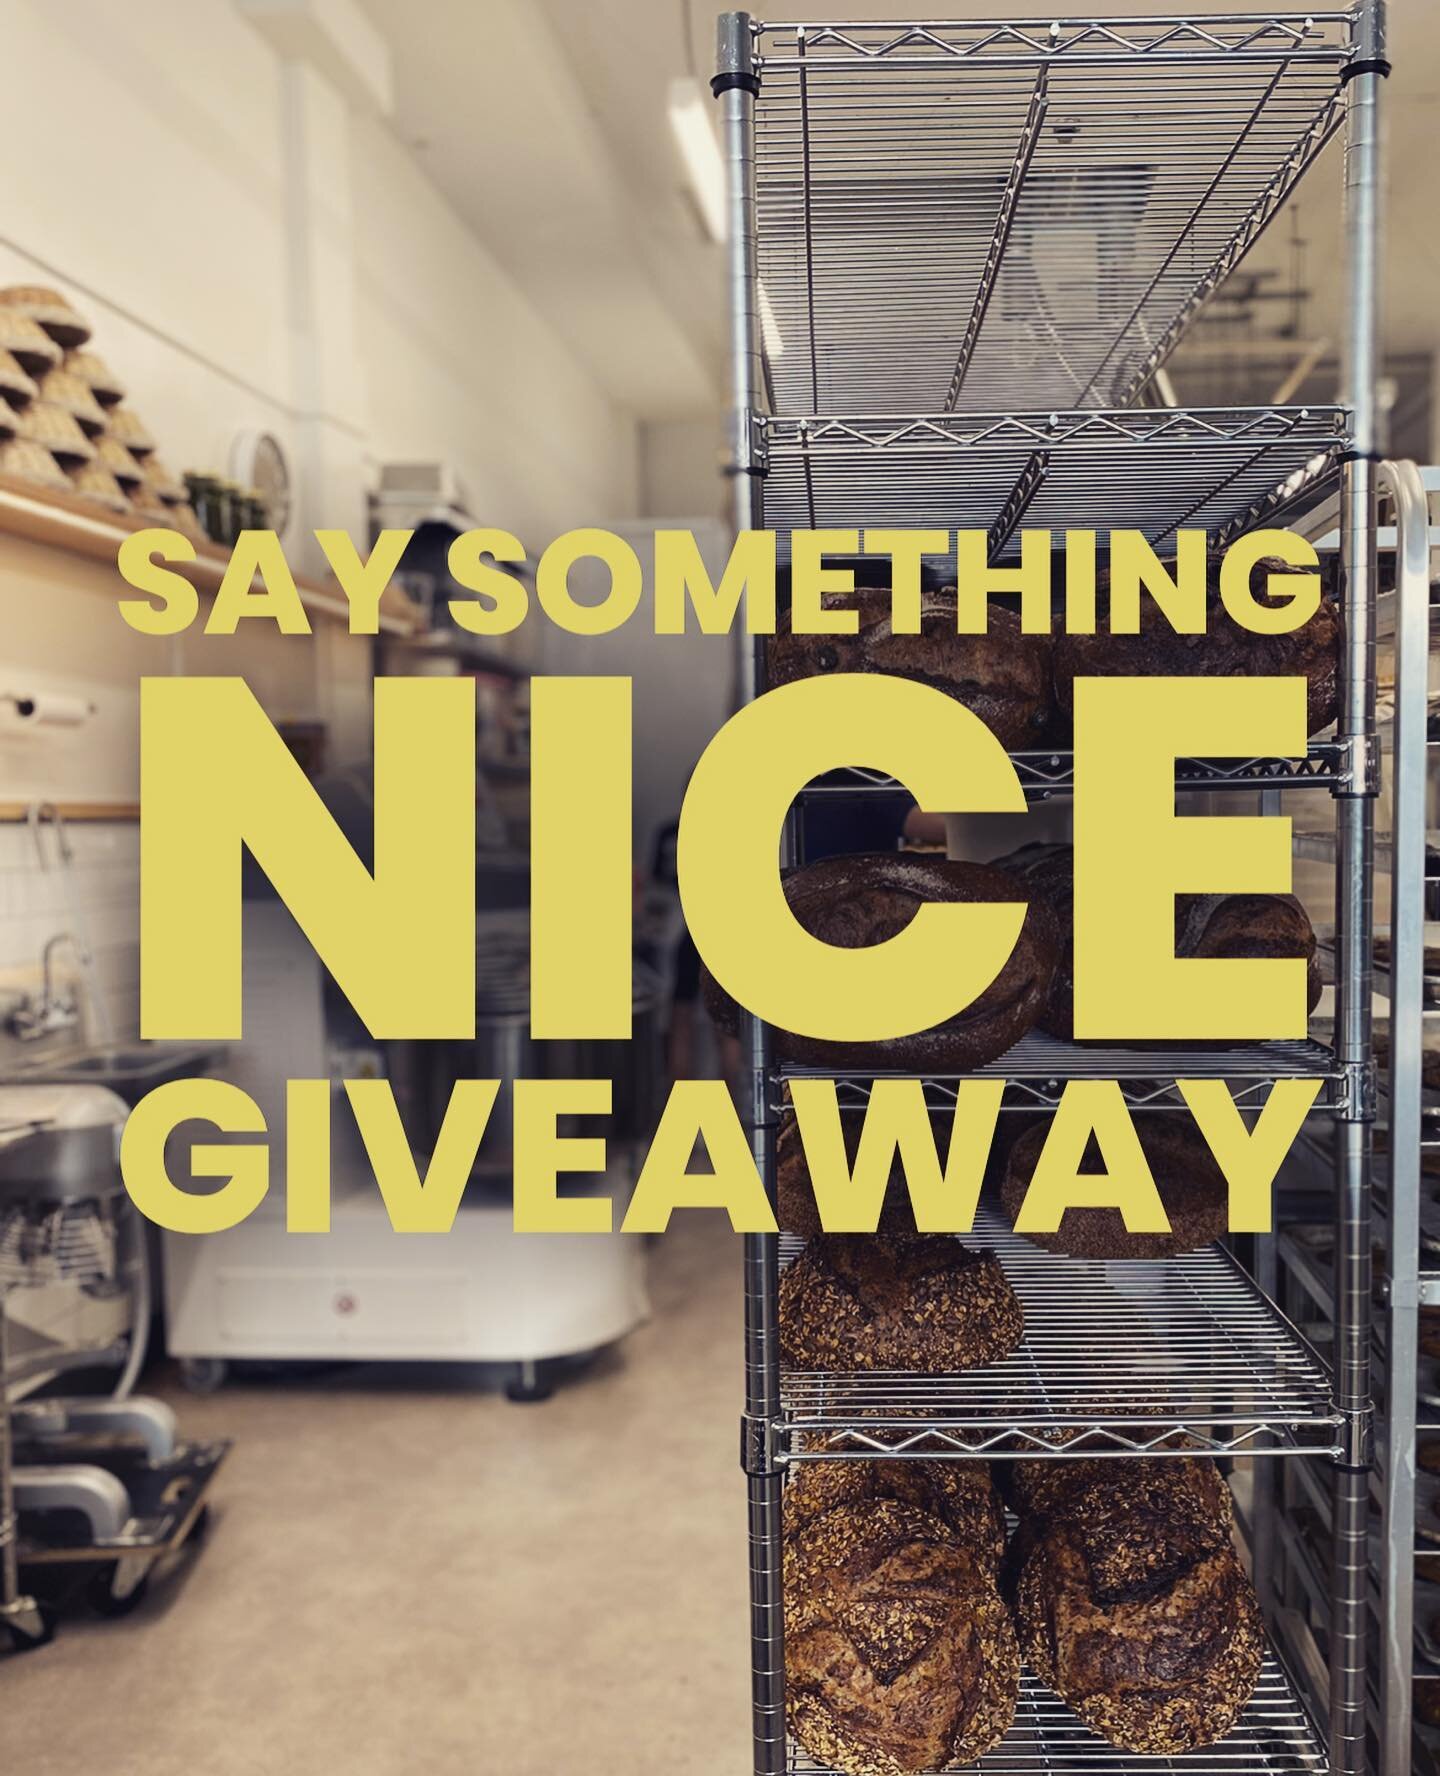 hey! it&rsquo;s a nice time to say something nice! easiest giveaway ever: comment telling us which local business you&rsquo;ve had a really nice experience at recently (tag them if applicable) and you&rsquo;ll be entered to win a $25 WCB gift card. y